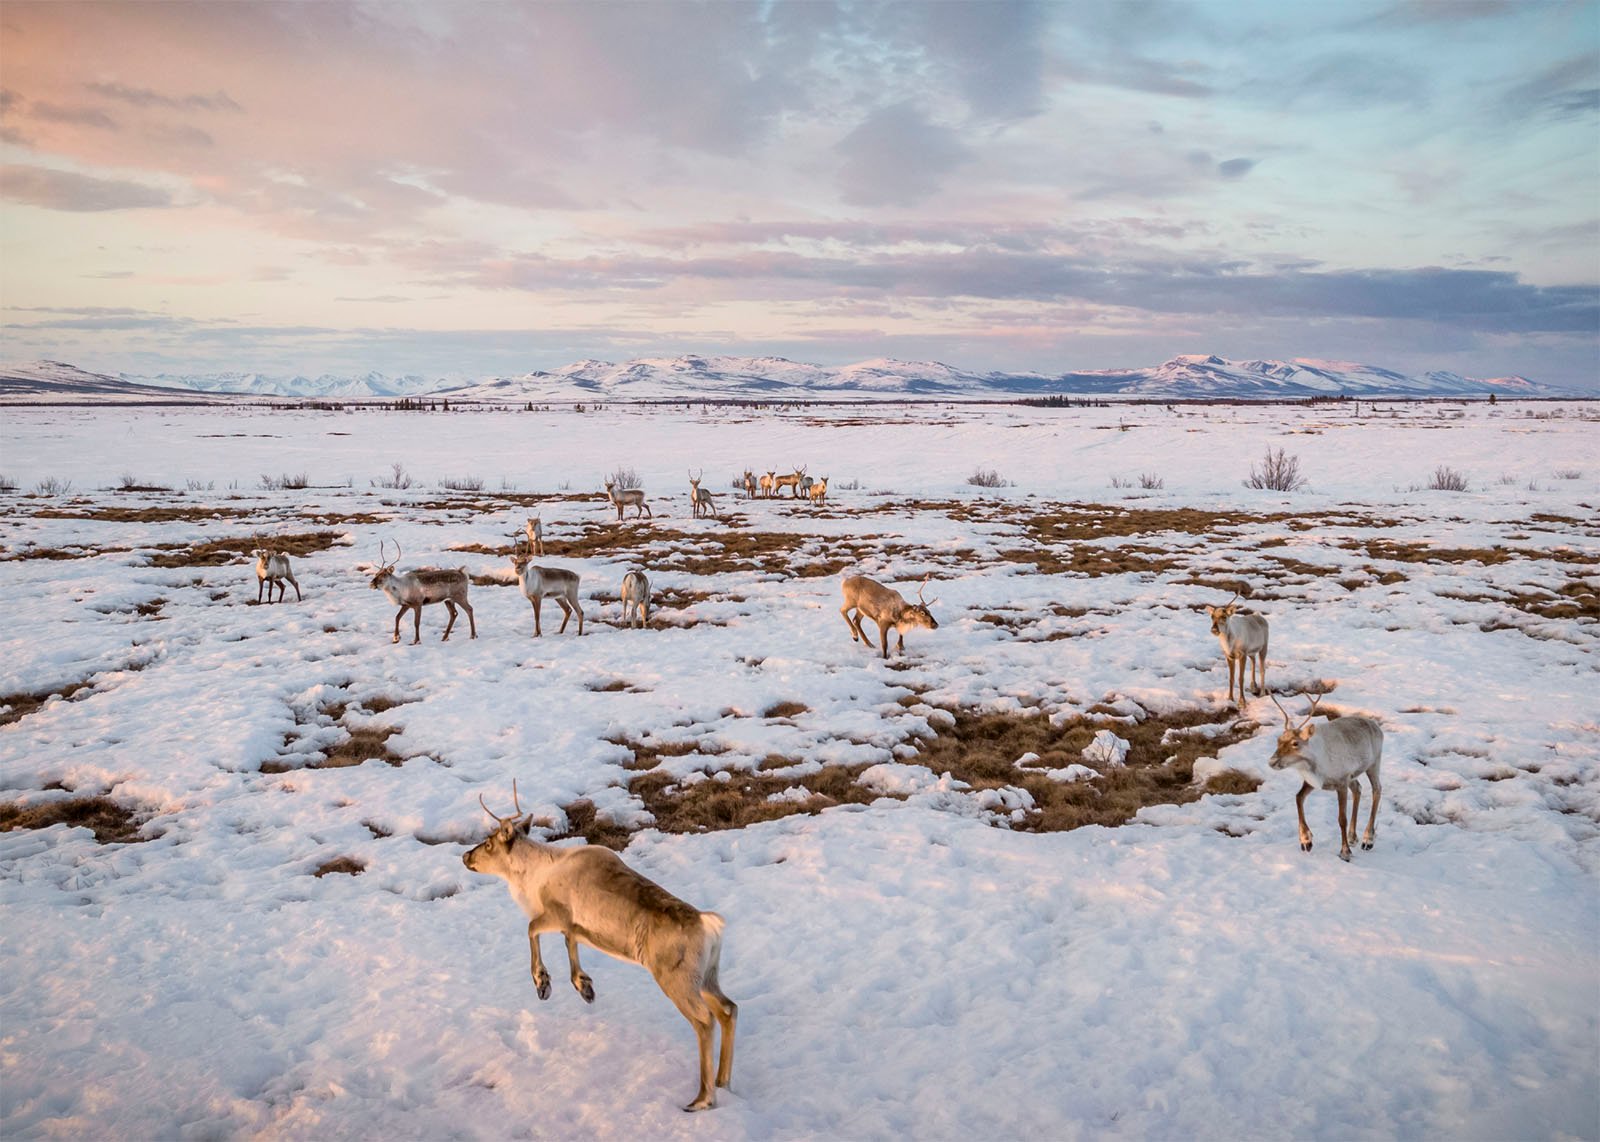 Reindeer graze in a snowy landscape at sunset, with pastel skies and distant mountains. the ground shows patches of snow and grass.